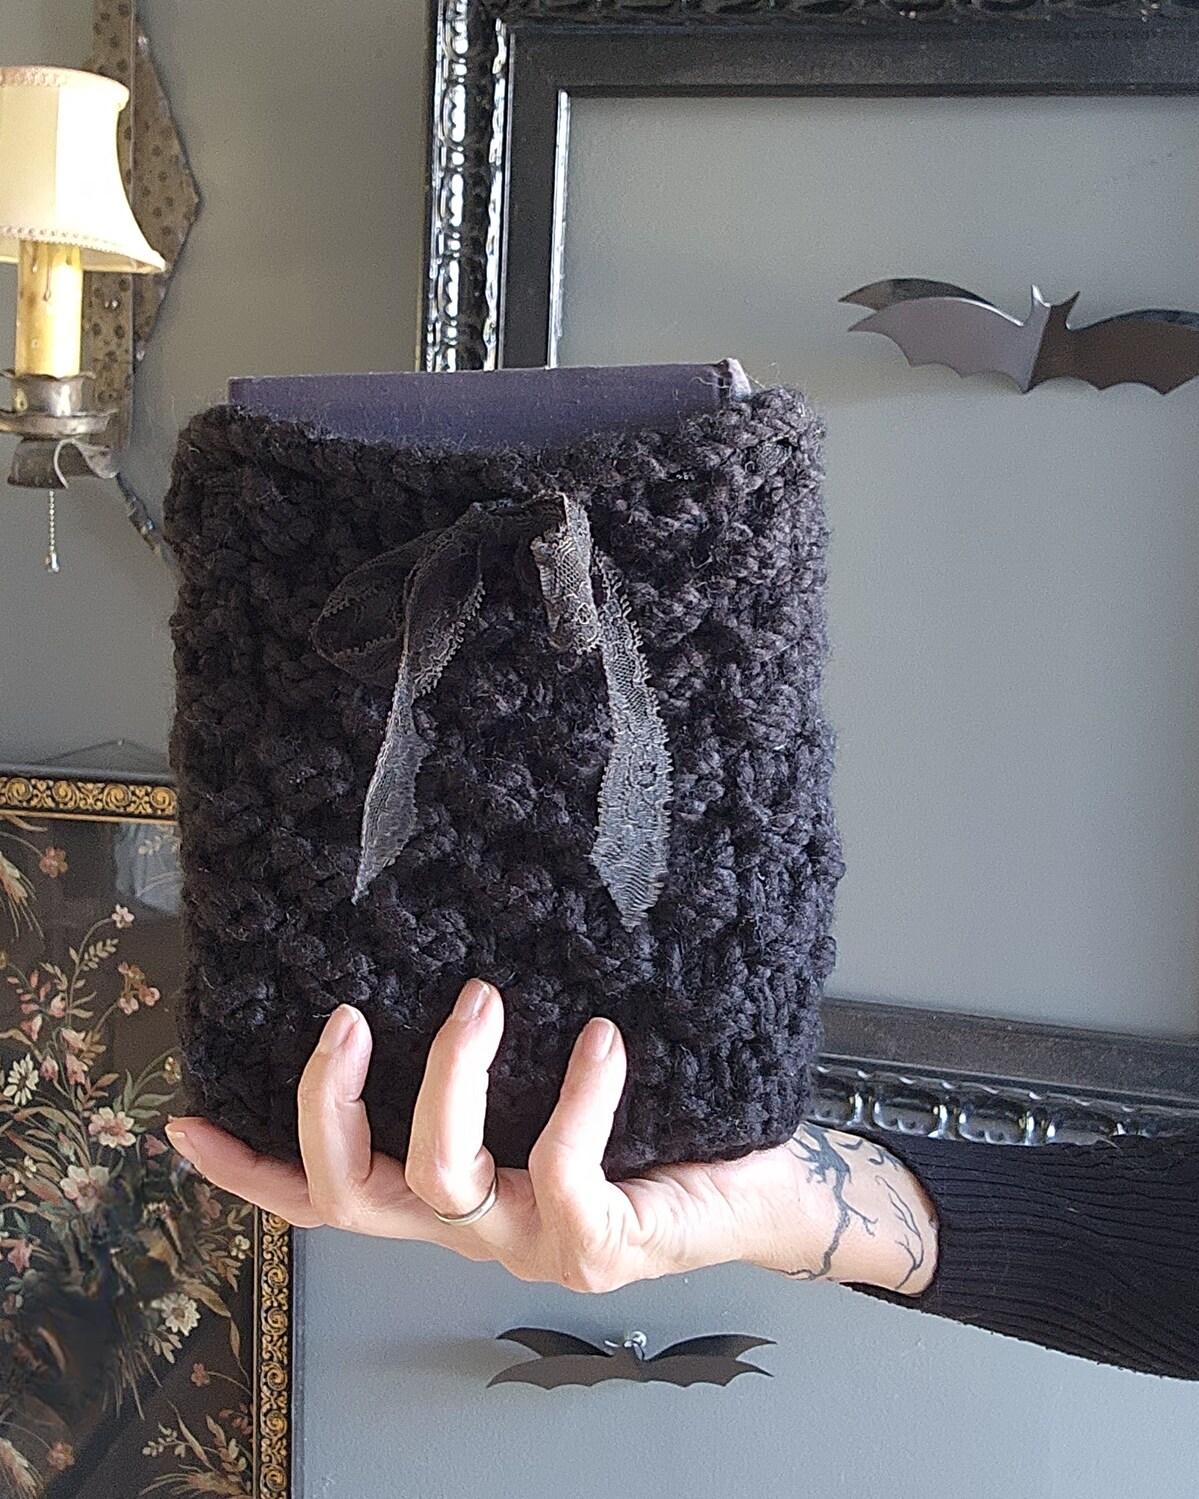 Shadow Hand Knit Book Pouch or Cover in Chunky Black Yarn